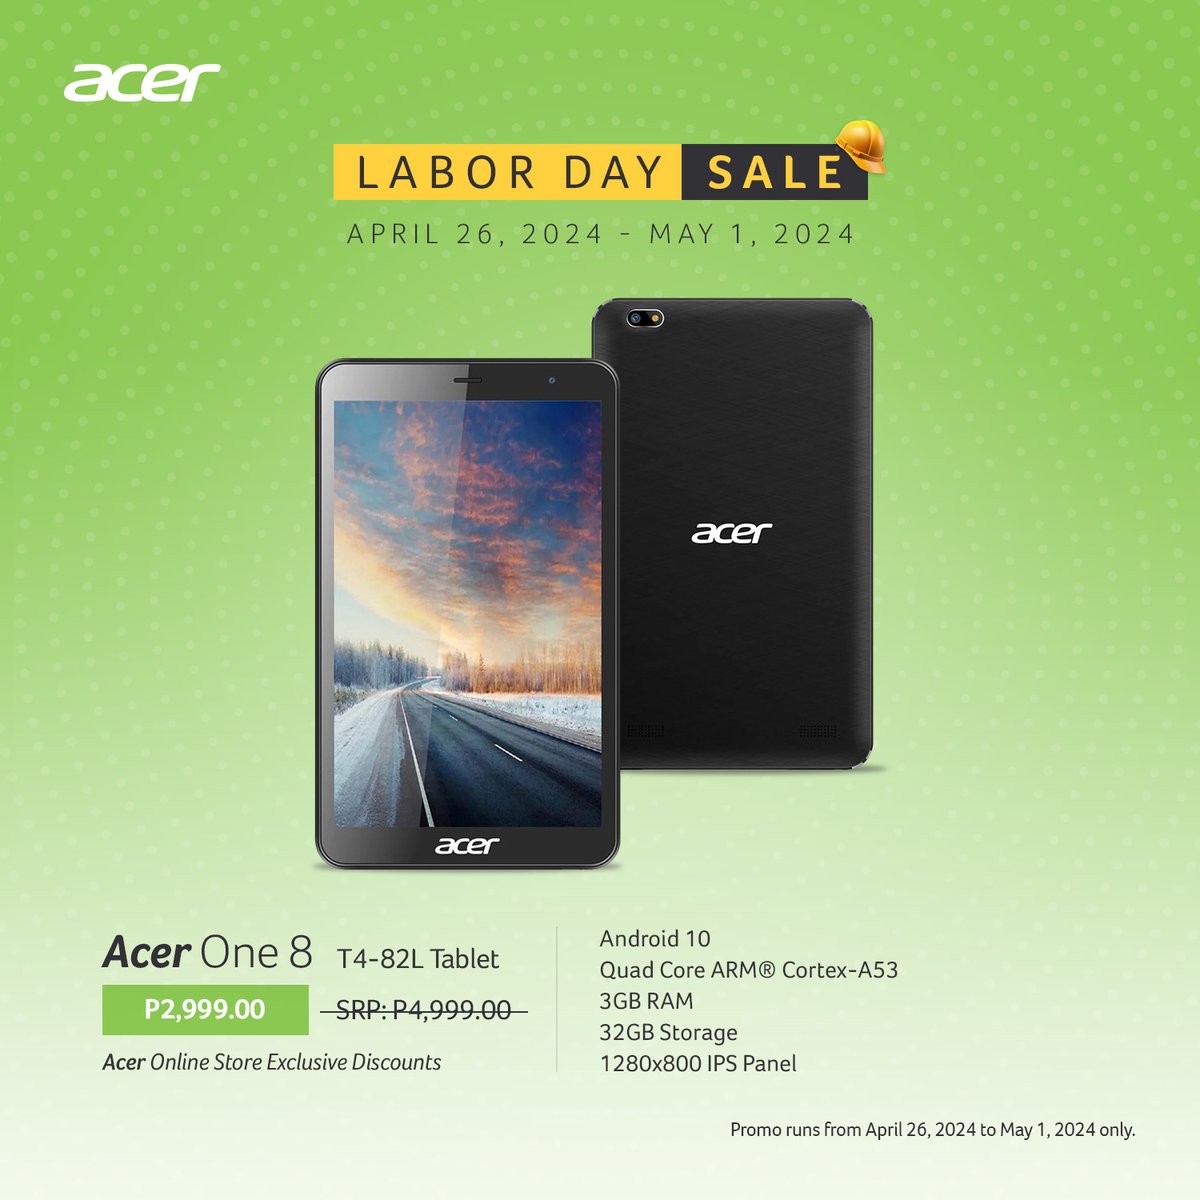 Get an exclusive Acer Online promo cash price of P2,999.00 for the Acer One 8 Tablet, valid only until May 1 #AcerLaborDaySale! Enjoy a brilliant 8-inch HD display, sleek design, and long battery life—perfect for life on-the-go. 🌟 acer.link/3WnqtLJ